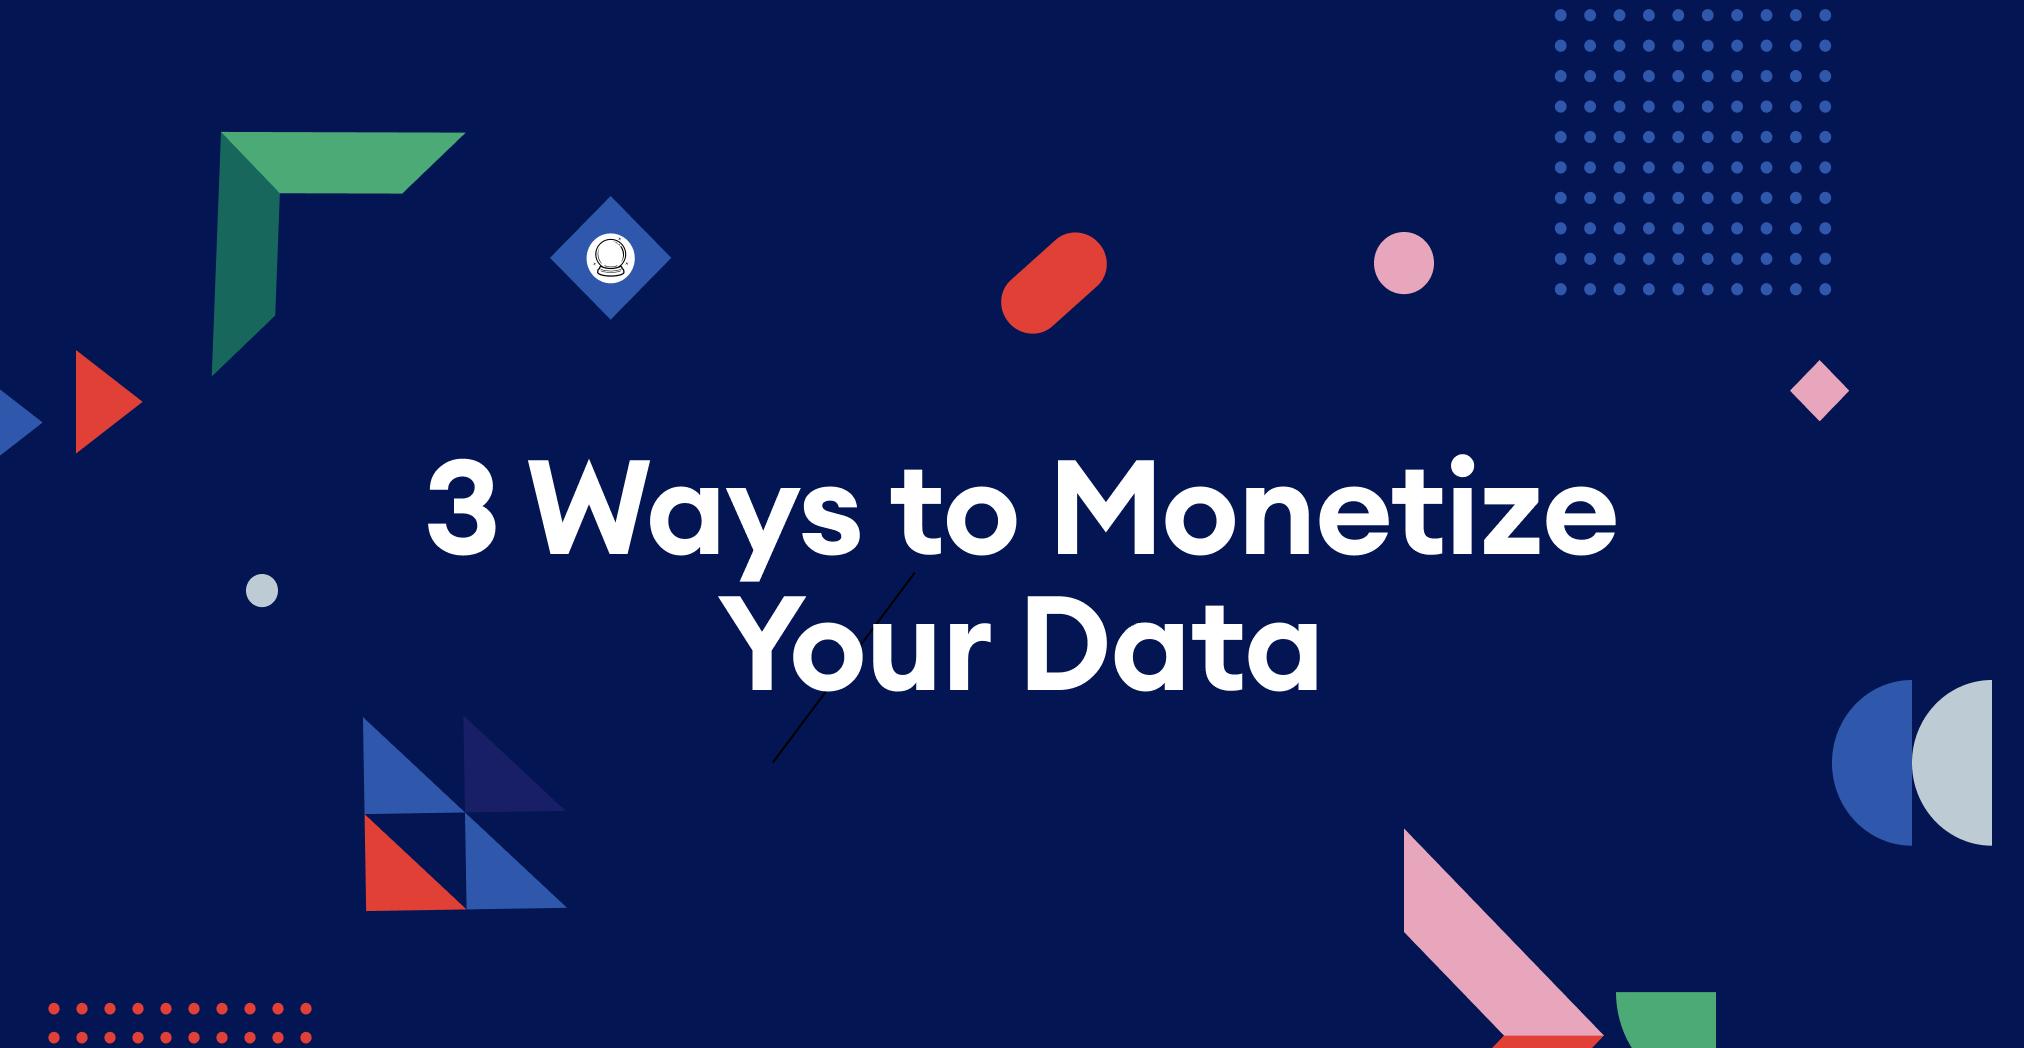 3 Ways to Monetize Your Data